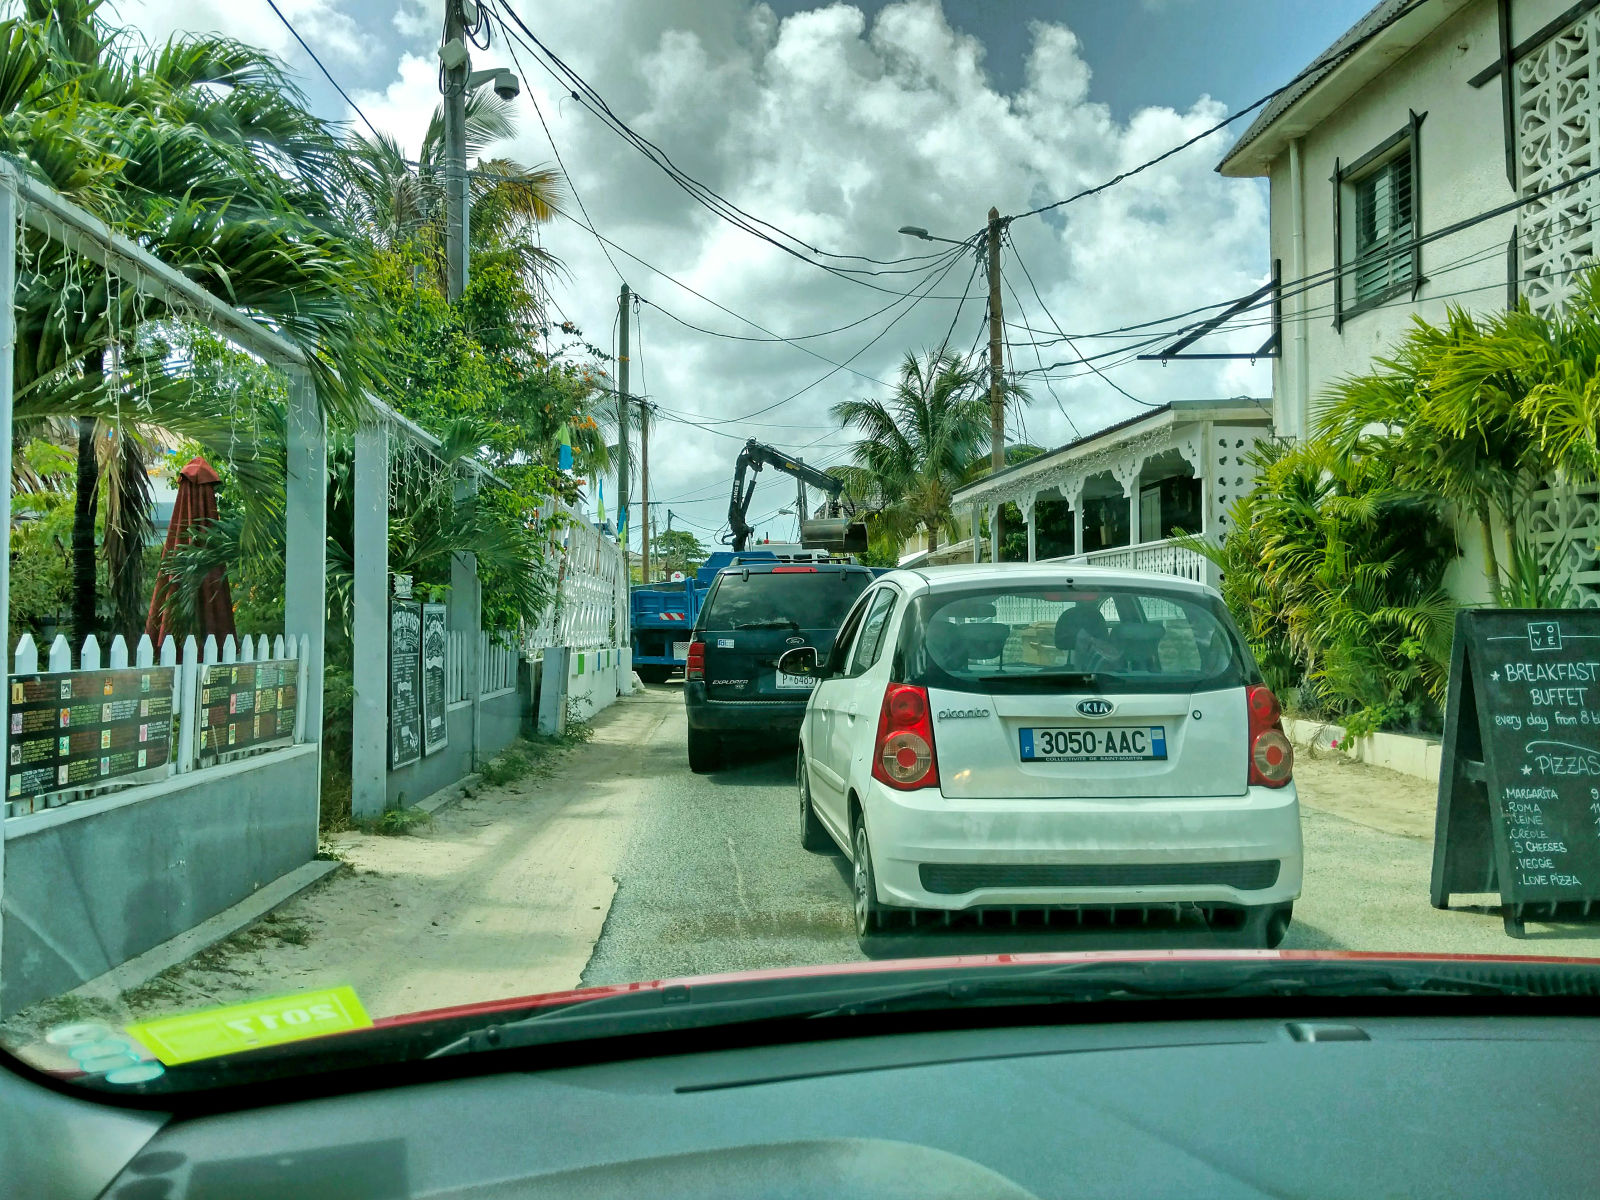 Typical St. Martin traffic jam: a construction vehicle stops in the middle of the road for a while, and...I’m behind a Kia Picanto!